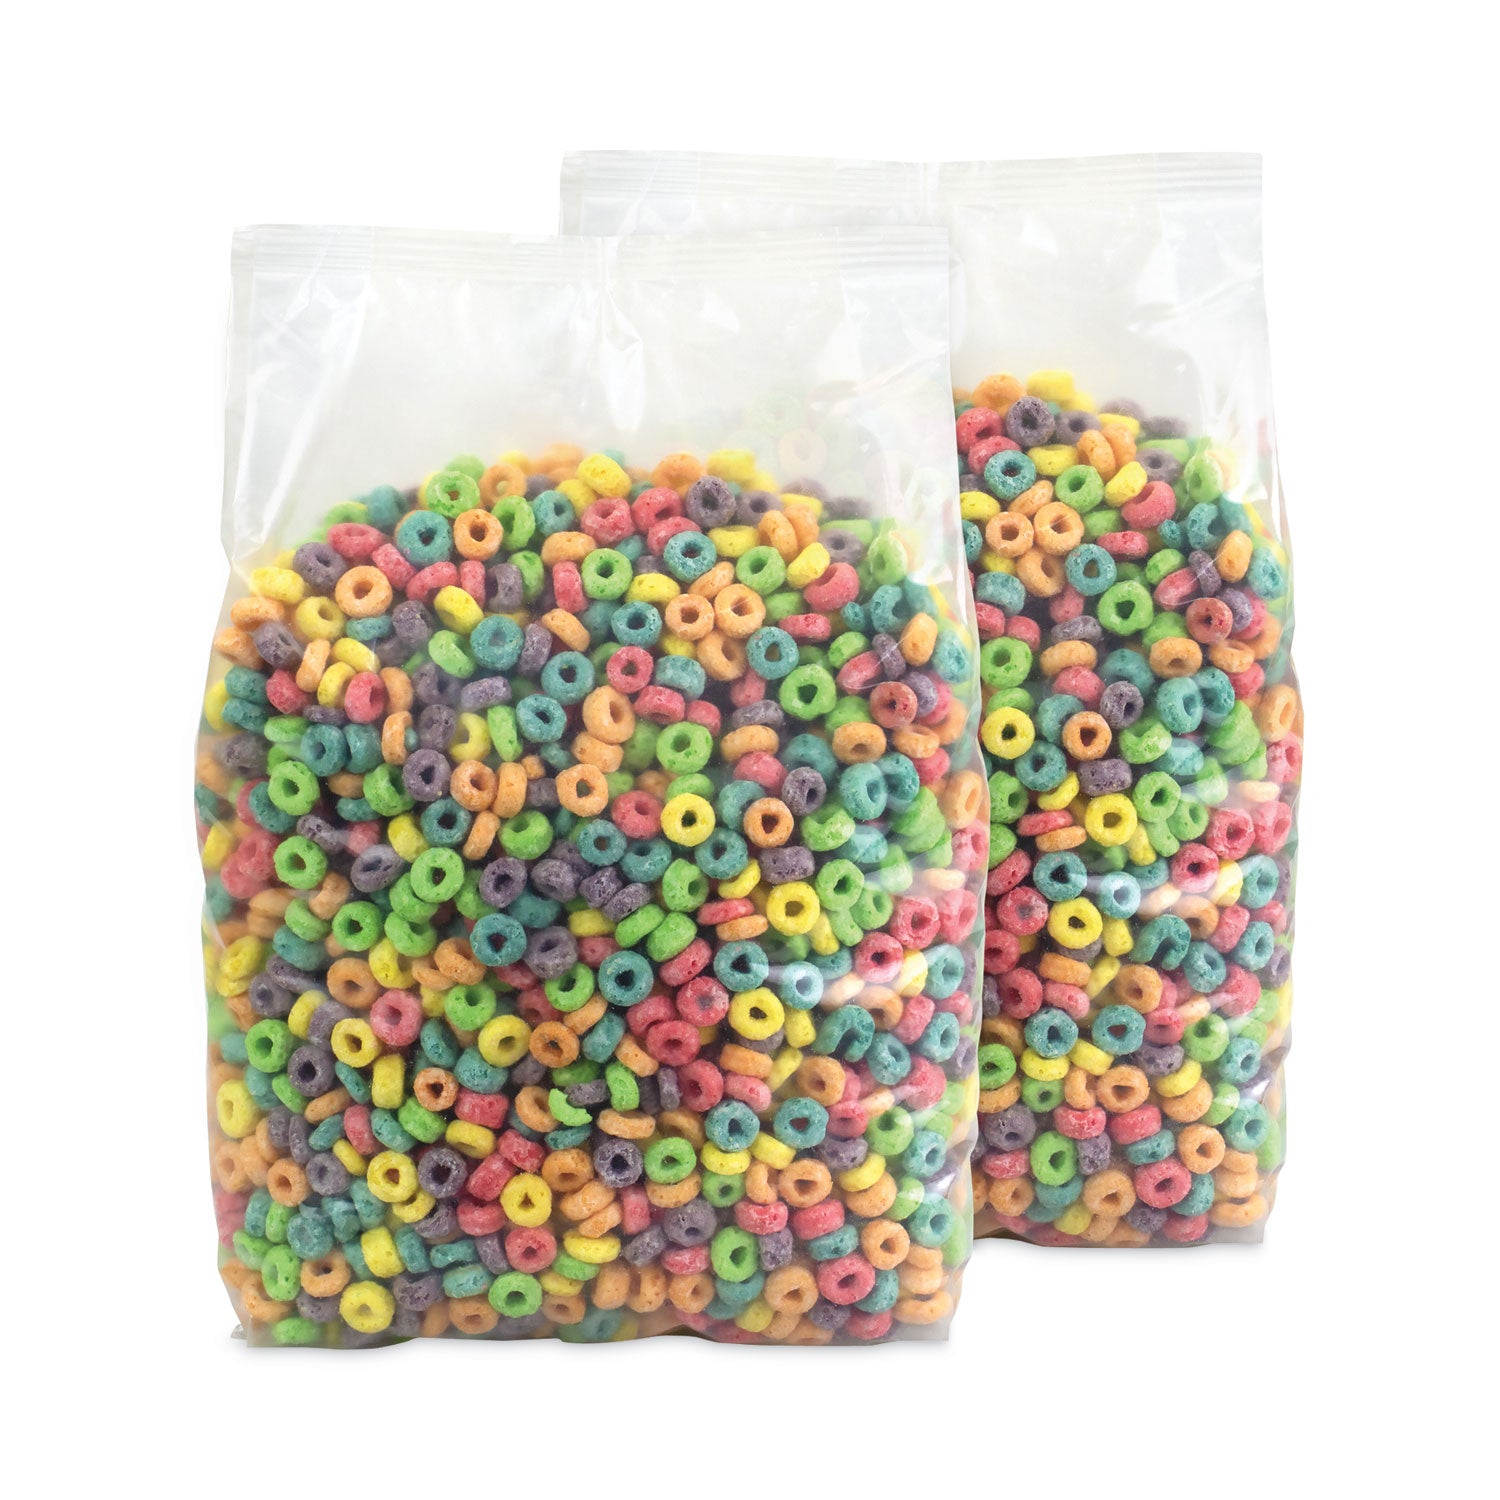 froot-loops-breakfast-cereal-43-oz-bag-2-bags-box-ships-in-1-3-business-days_grr22000900 - 2